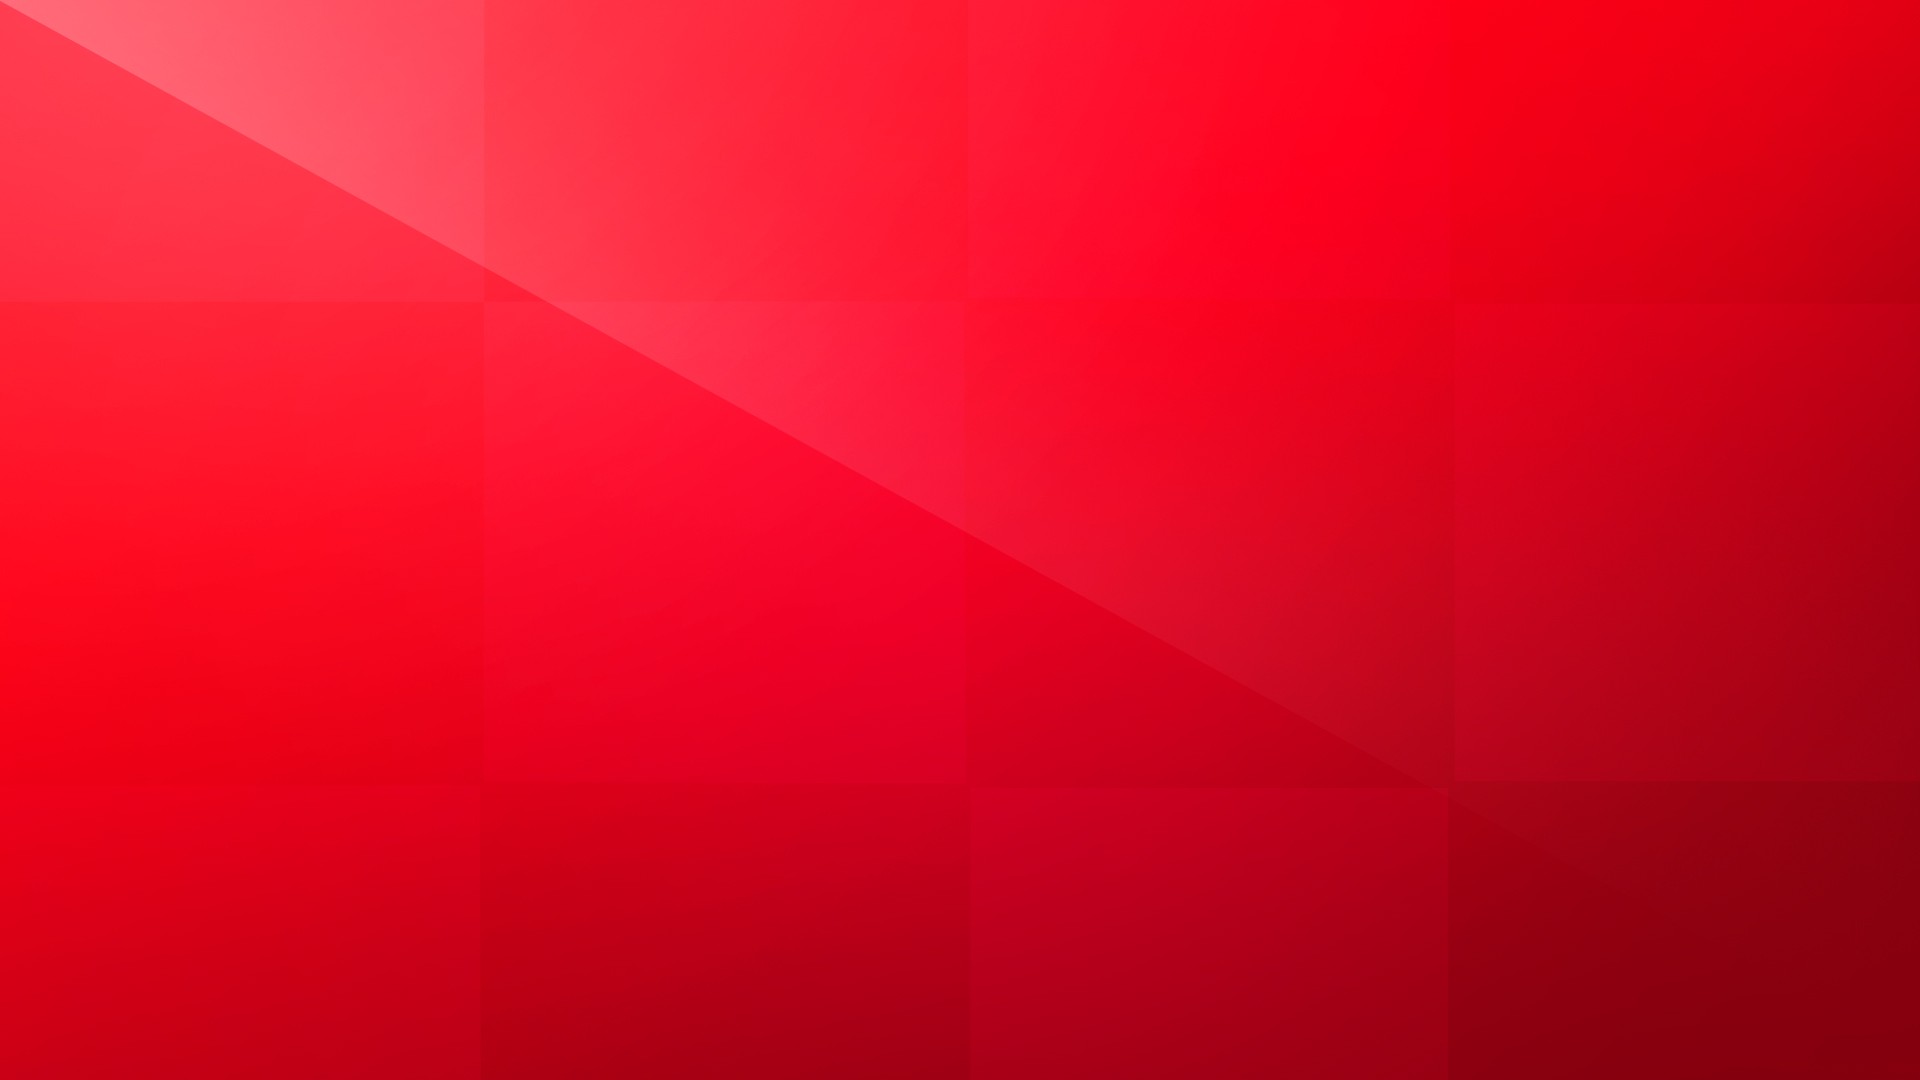 Red Windows Abstract Desktop Pc And Mac Wallpaper